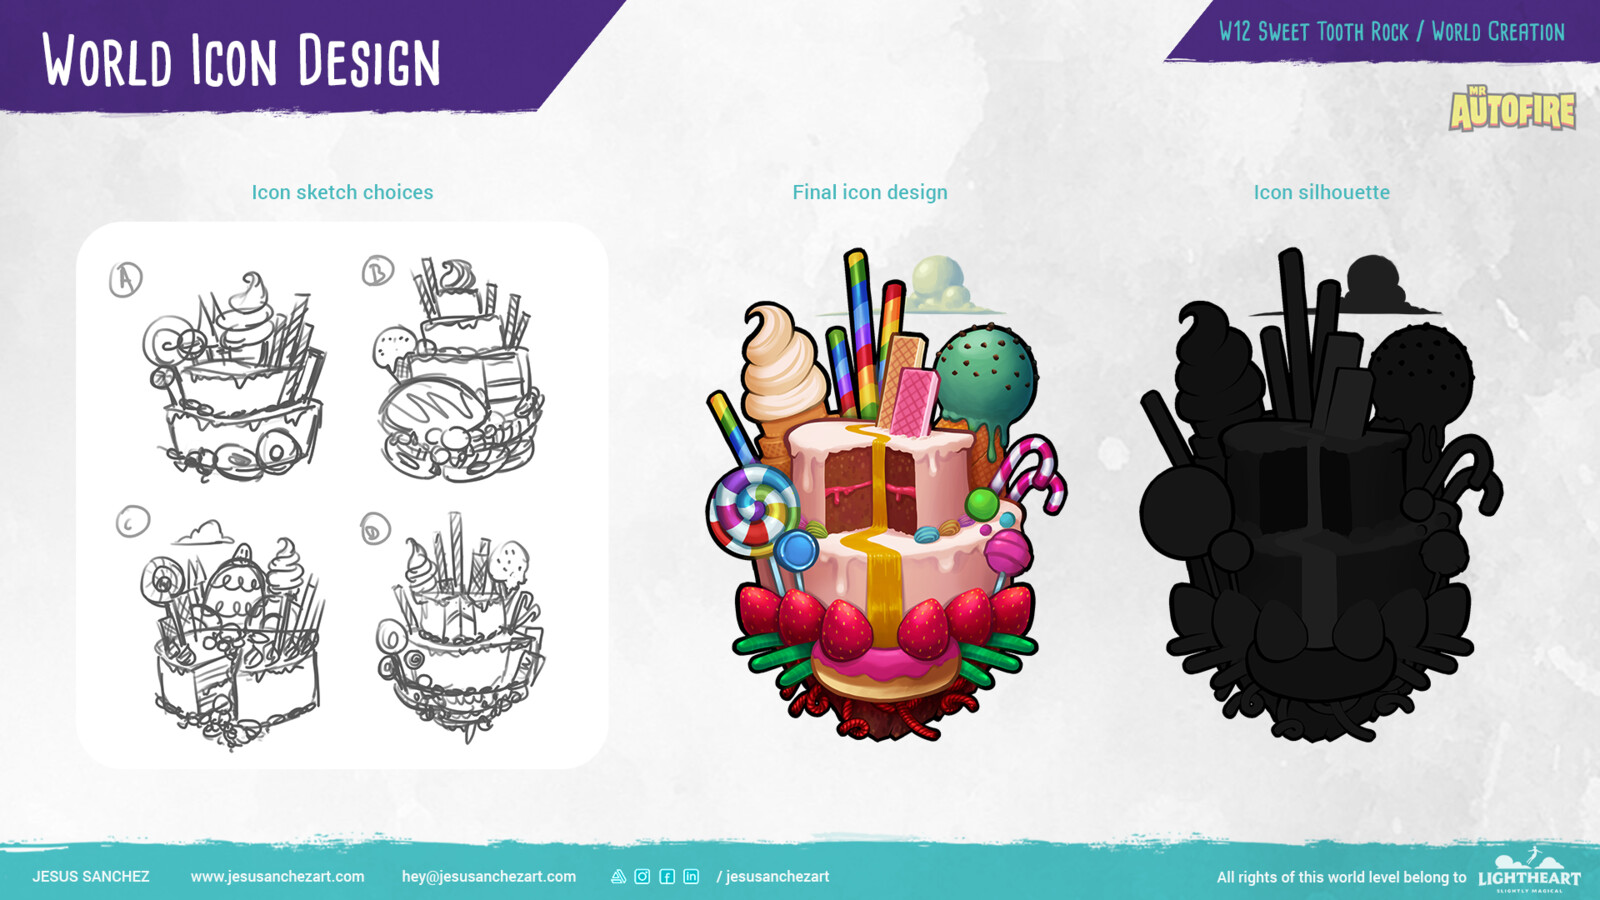 Sweet Tooth Rock icon design process